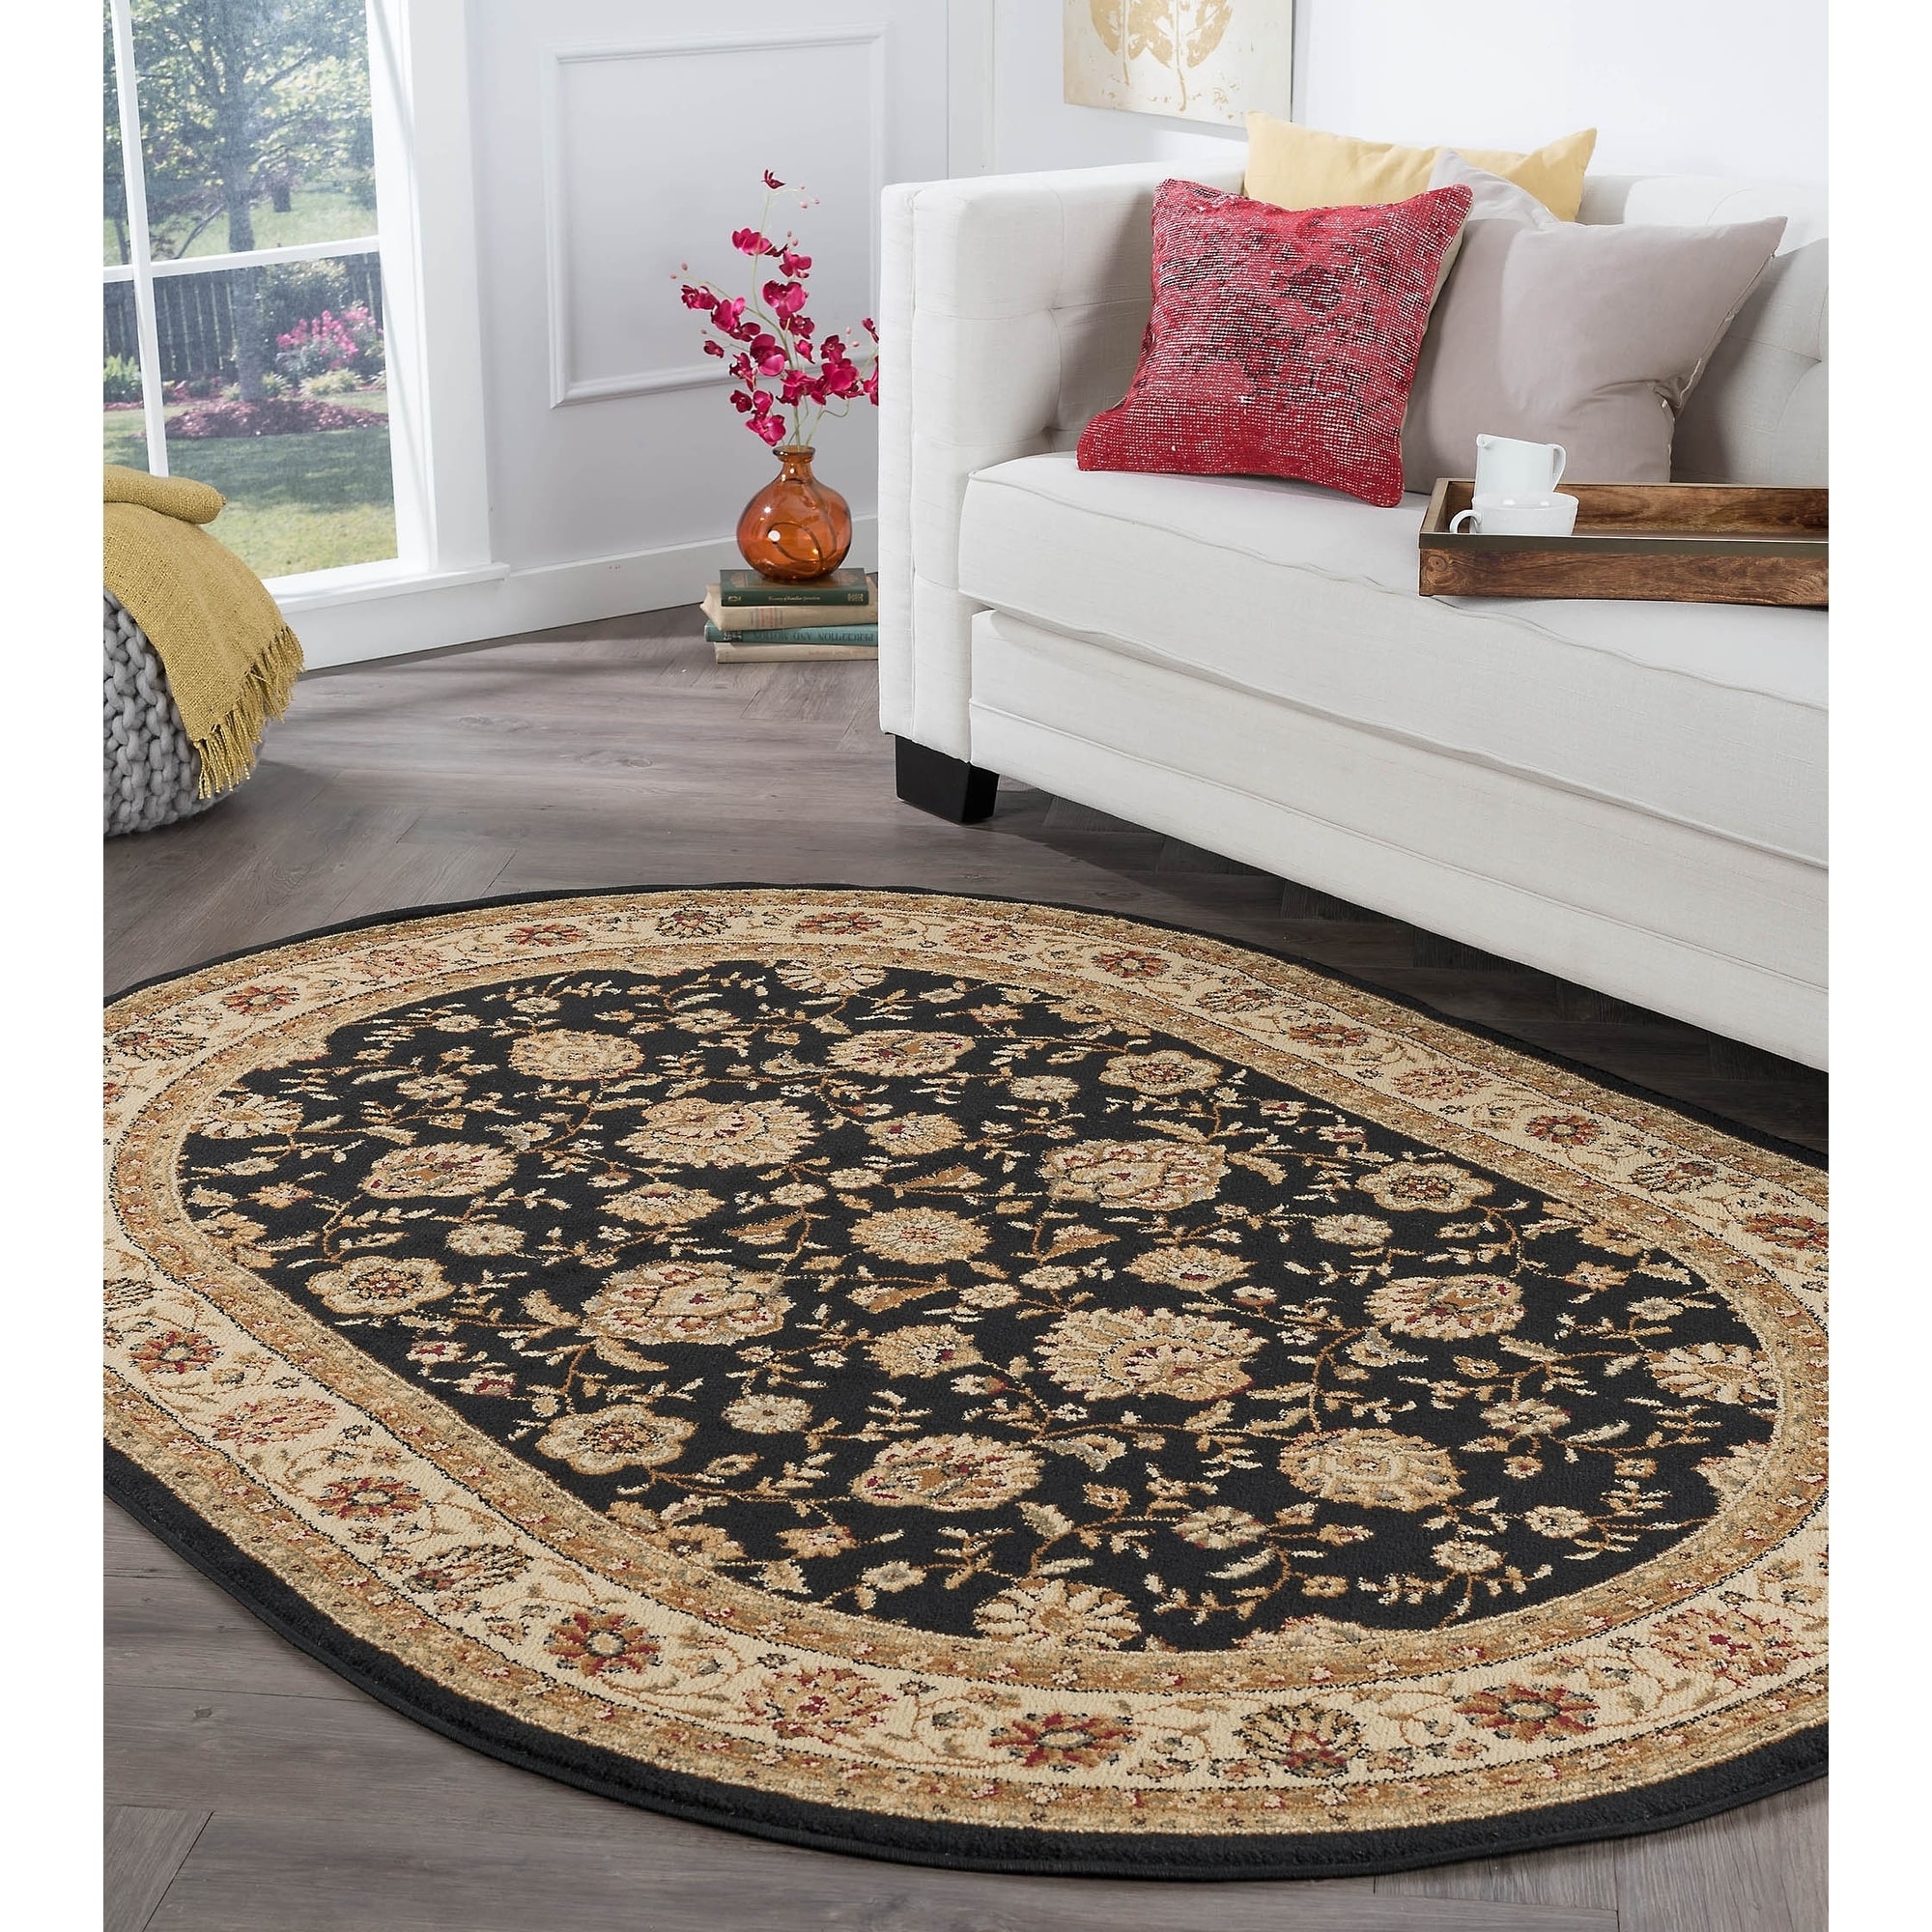 Rhythm 105143 Black Traditional Area Rug (6 7 X 9 6 Oval) (BlackSecondary Colors Beige, red, greenShape OvalTip We recommend the use of a non skid pad to keep the rug in place on smooth surfaces.All rug sizes are approximate. Due to the difference of m